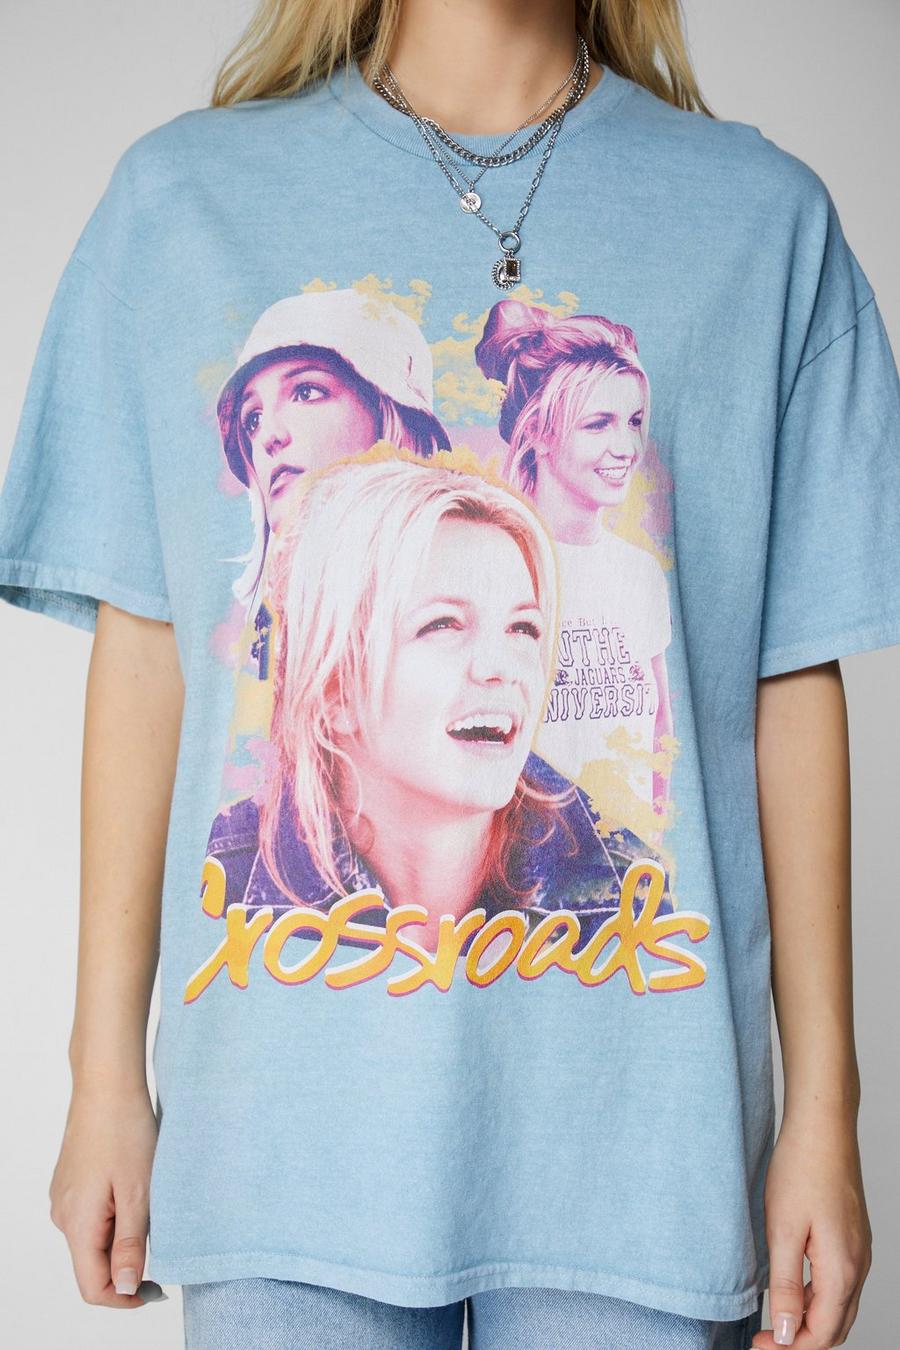 Britney Spears Crossroads Oversized Graphic T-shirt